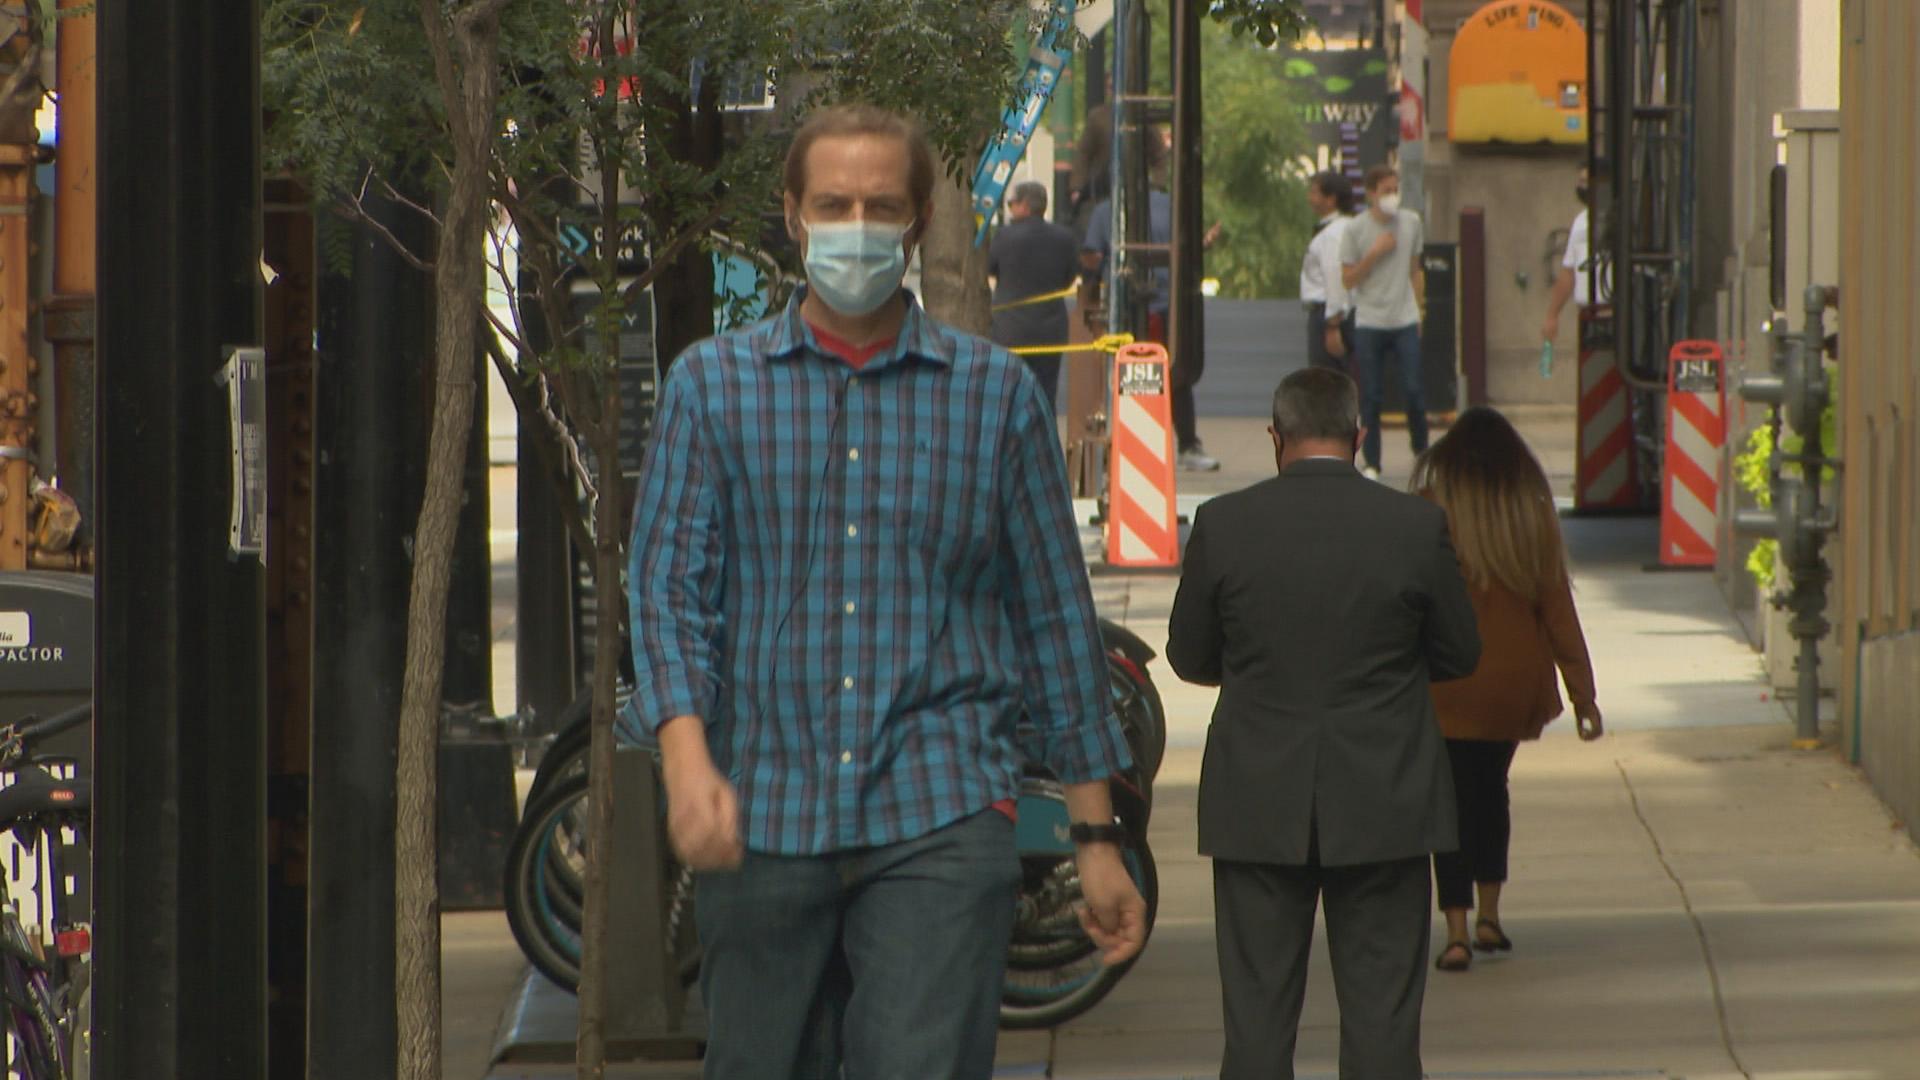 People wearing face masks walk along a street in downtown Chicago on Sept. 2, 2020. Officials concerned about the possibility for a spike in COVID-19 infections over the Labor Day weekend are reminding residents to wear masks and practice social distancing. (WTTW News)